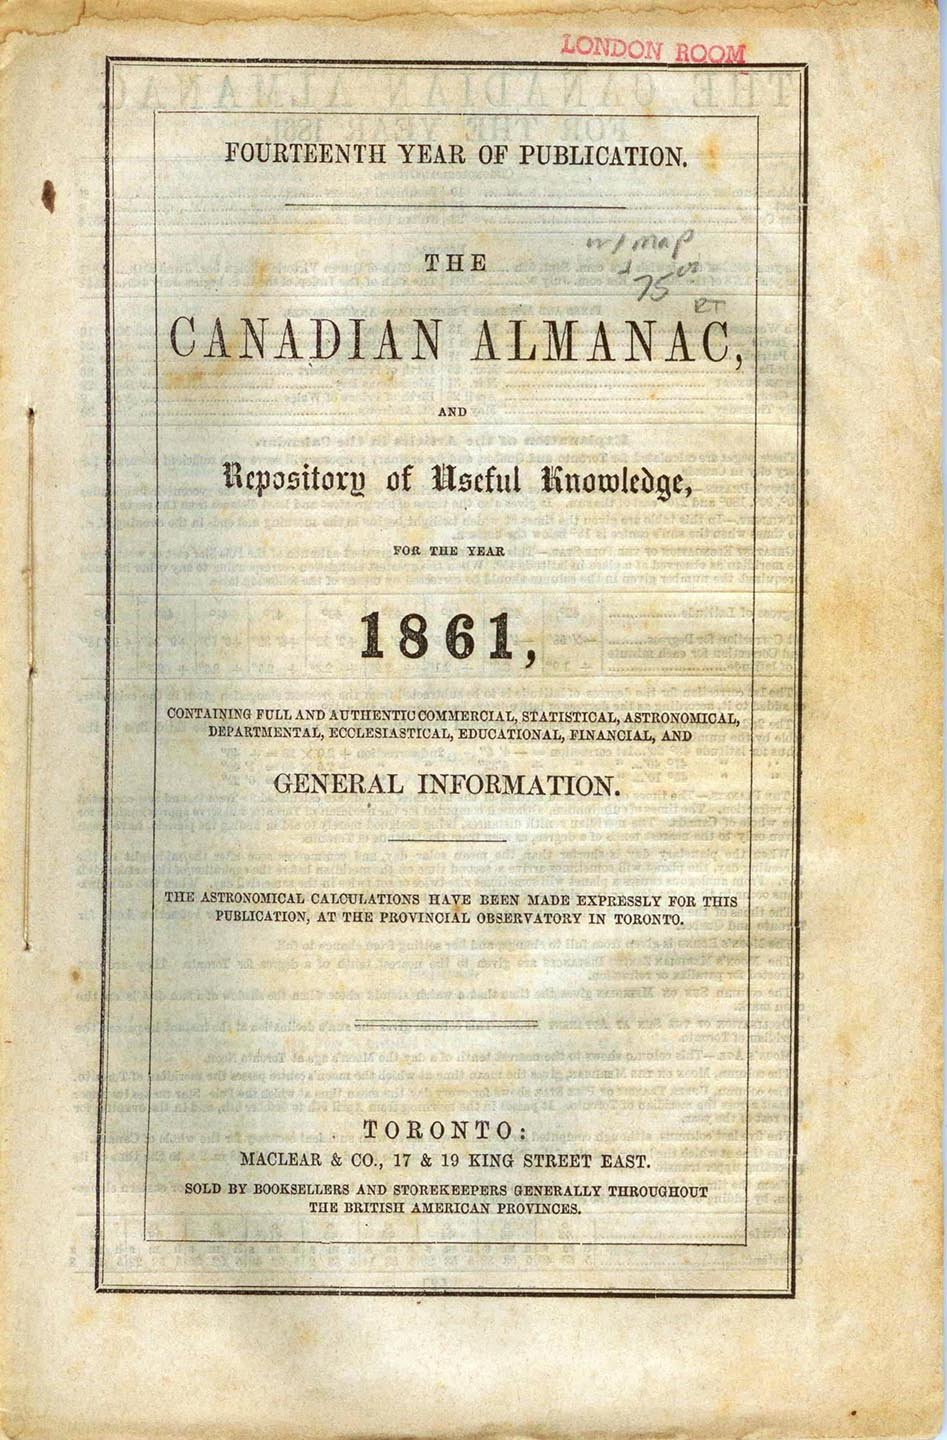 The Canadian Almanac, and Repository of Useful Knowledge for the year 1861